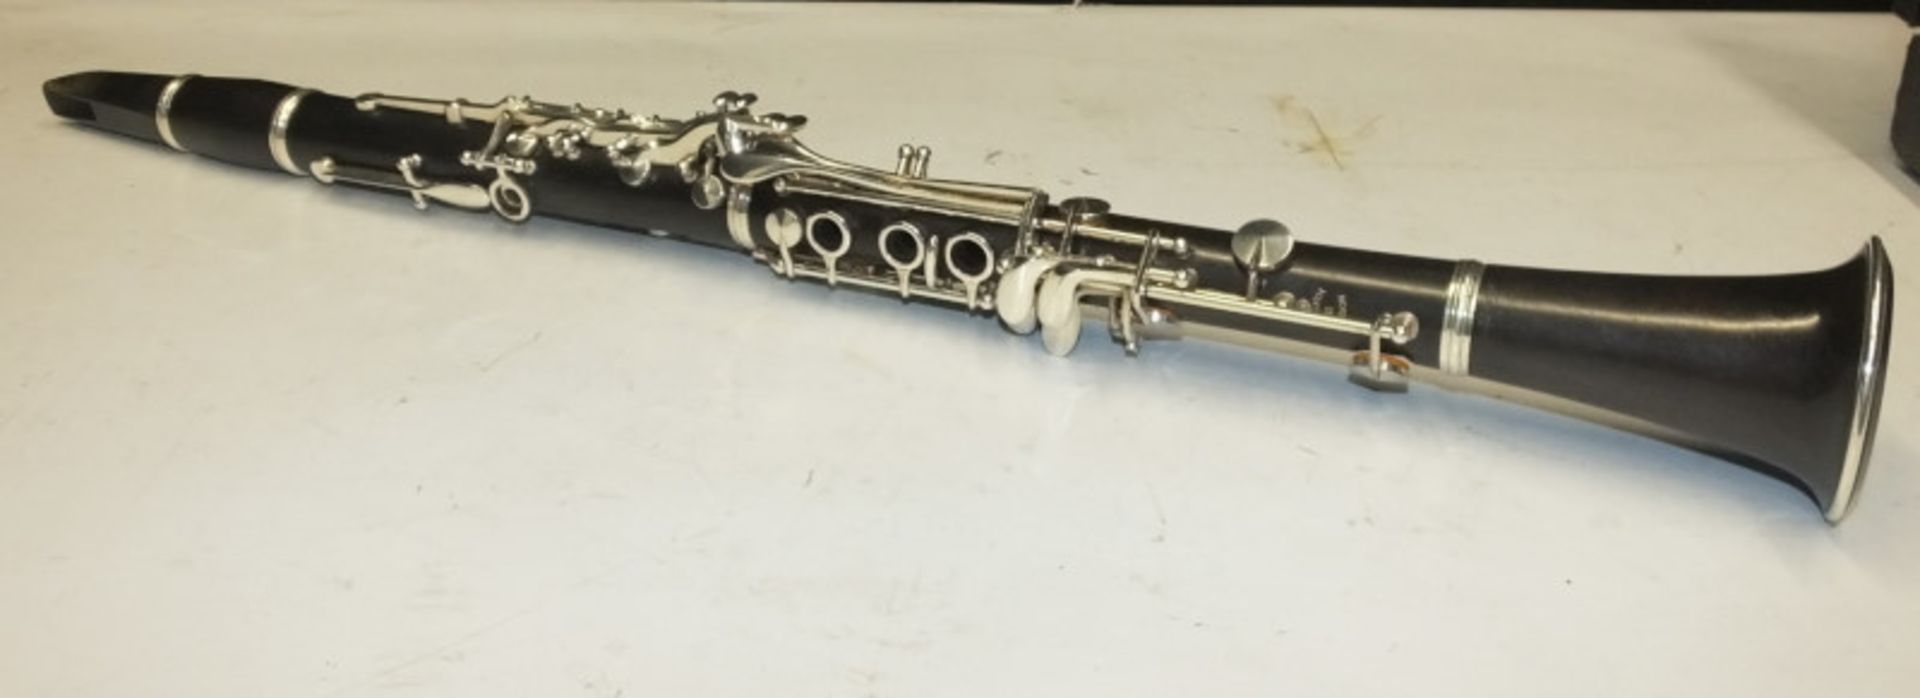 Howarth S2 Clarinet in case - Serial Number - 2153. - Image 20 of 22